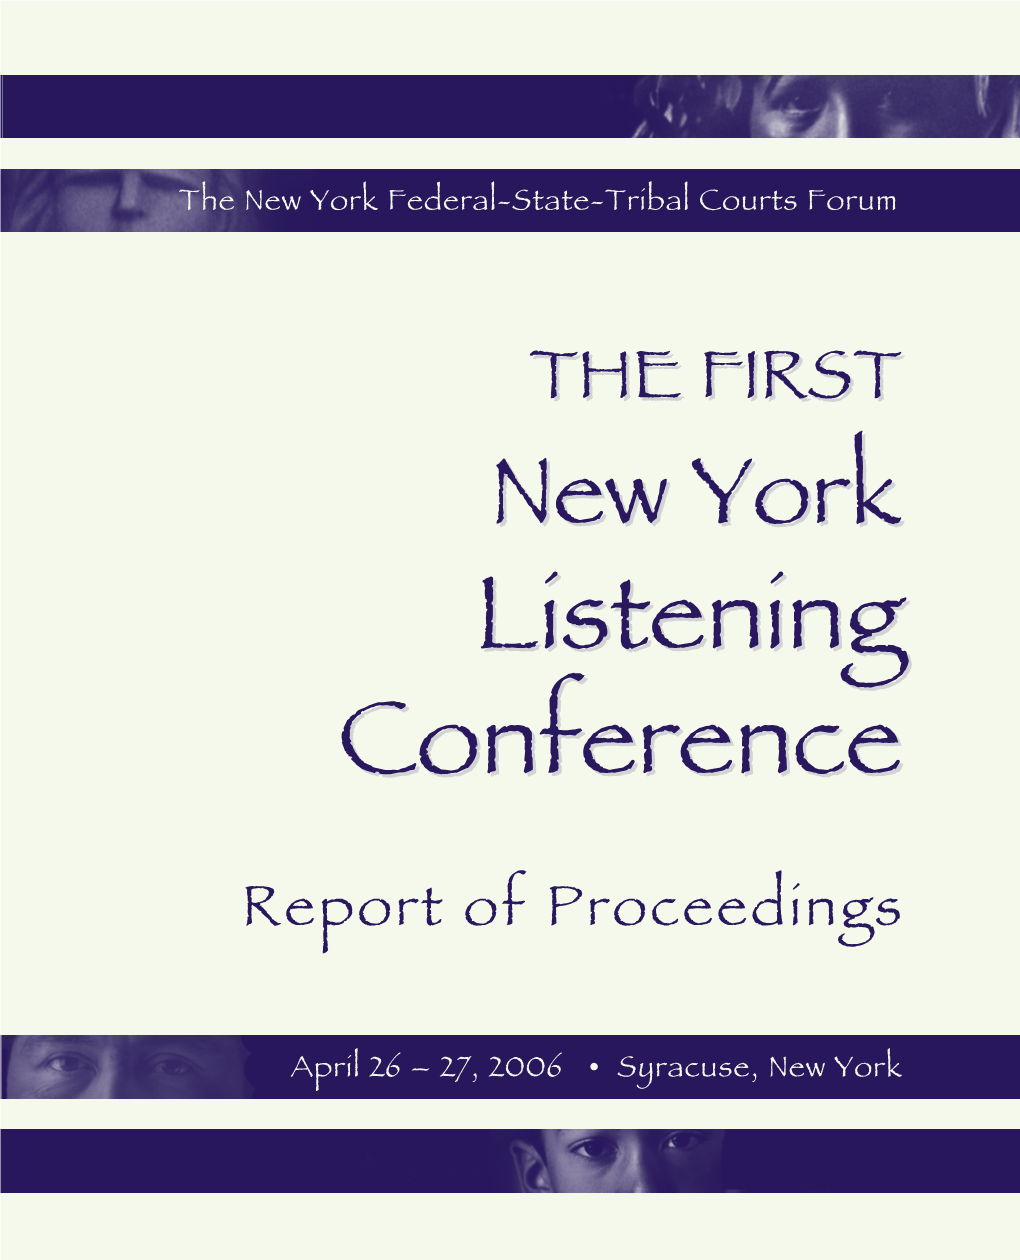 The First New York Listening Conference Report